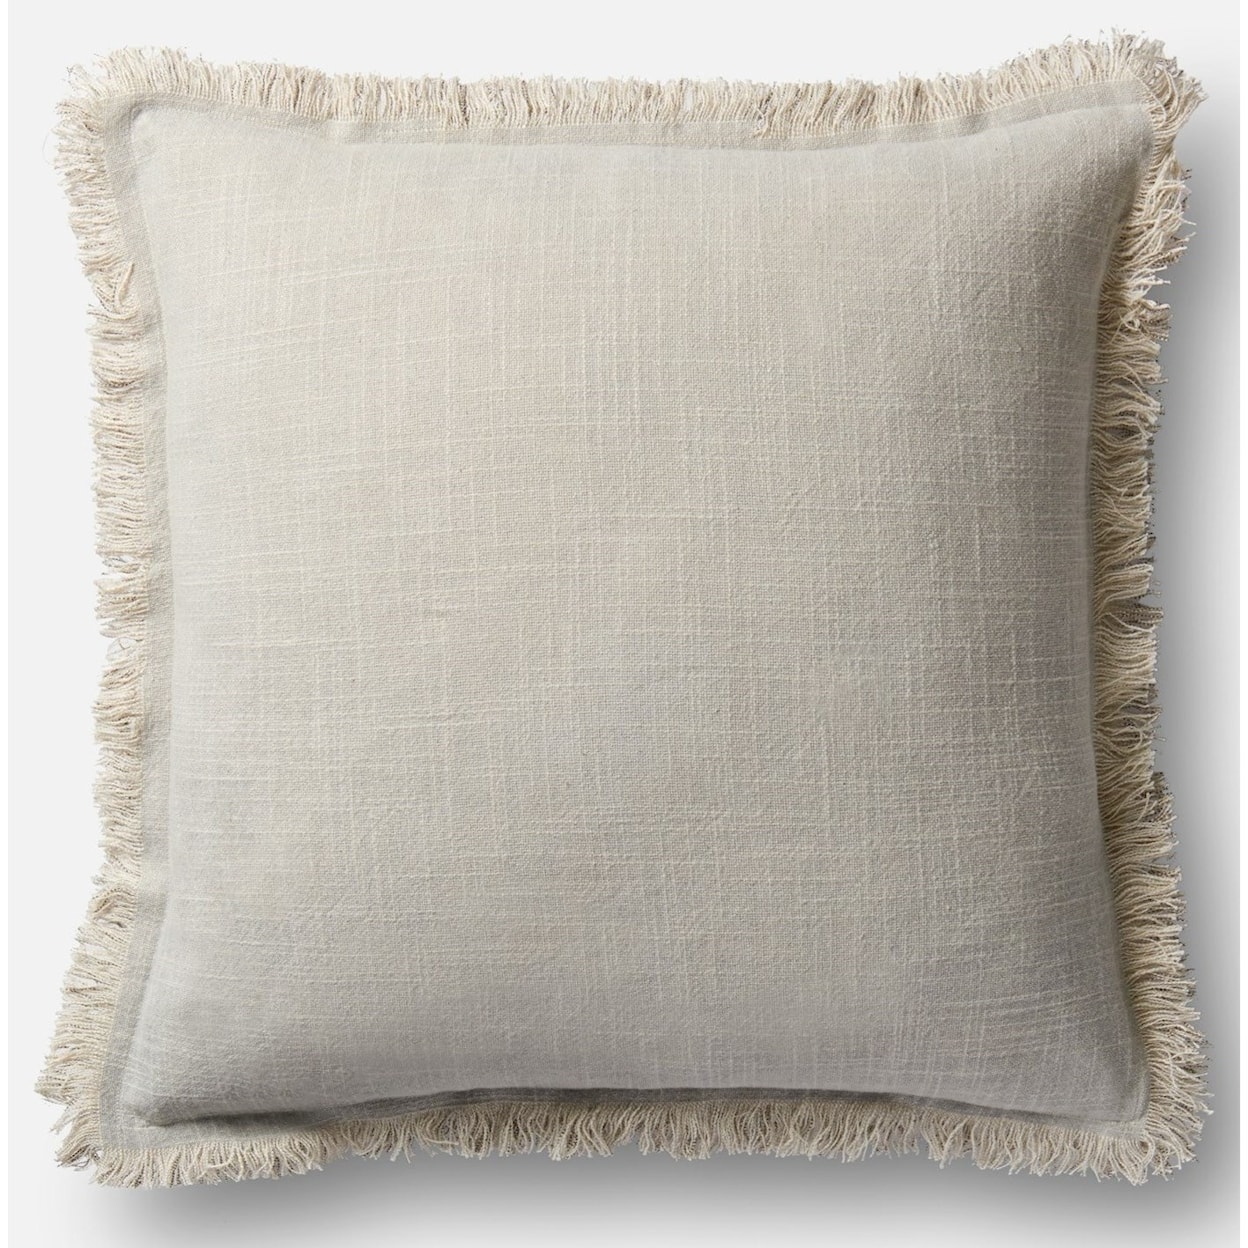 Magnolia Home by Joanna Gaines for Loloi Accent Pillows 18" X 18" Cover w/Down Pillow